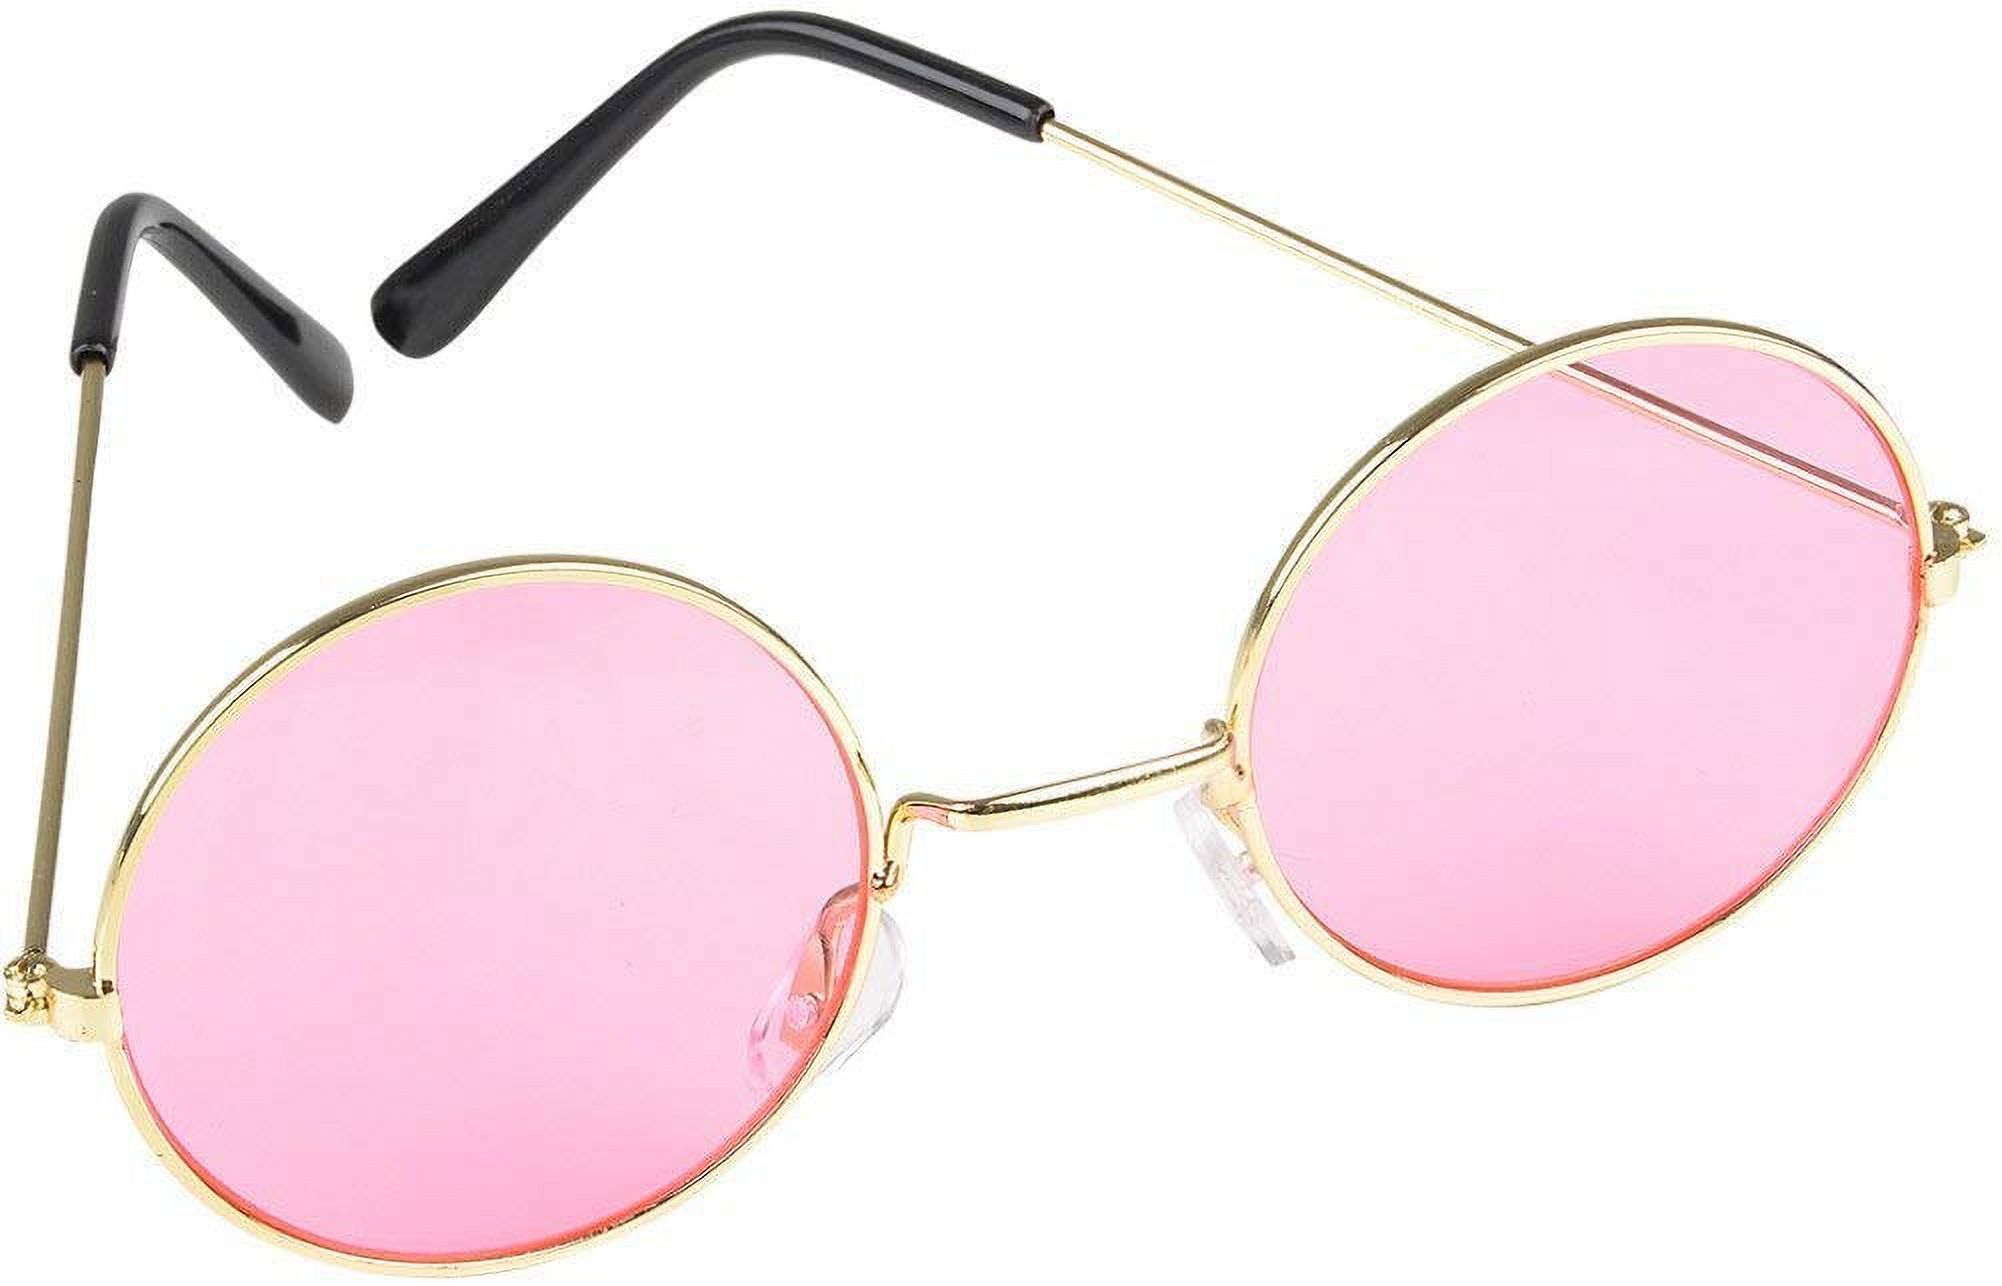 Rhode Island Novelty Round Color Lens Sunglasses 1 Pair of Pink Glasses - image 1 of 2